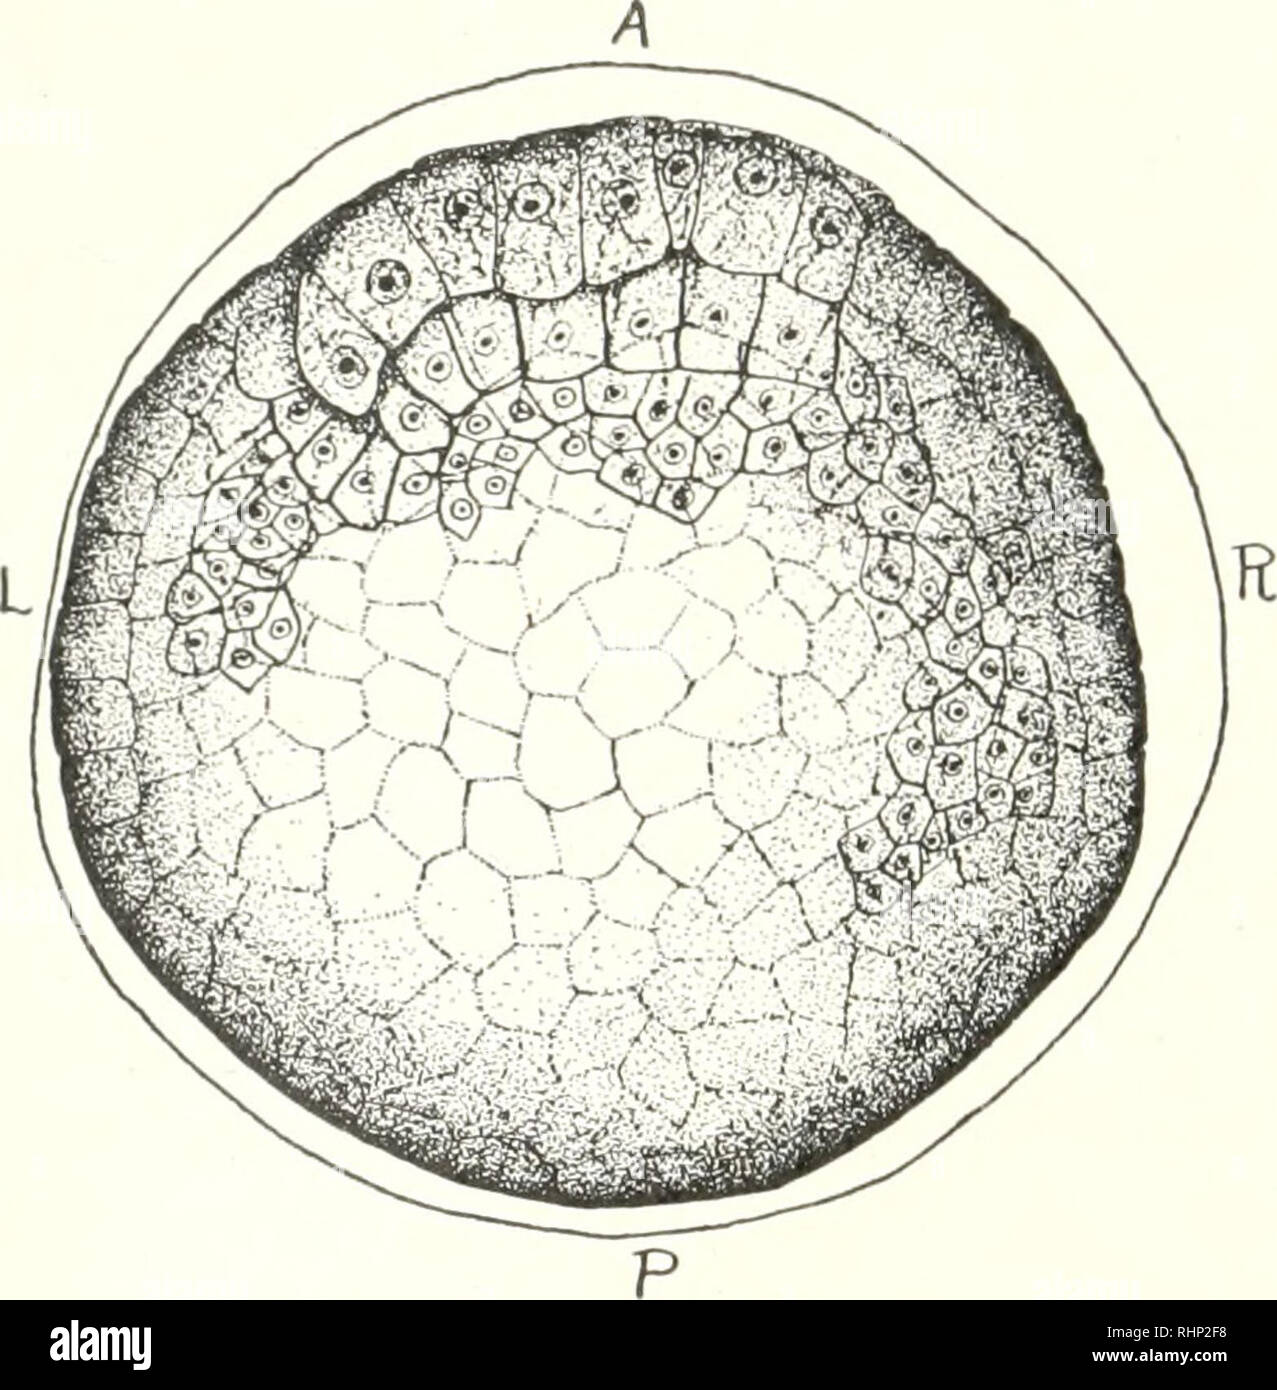 . The Biological bulletin. Biology; Zoology; Biology; Marine Biology. 136 FLORENCE MARIE SCOTT been proliferating more slowly. The lateral margins of the posterior blastoporal lip are potential muscle cells of the tail; the central region is caudal mesenchyme. The relationship of the hlastopore regions are the same as they are in gastru- lation stages of Styela where the blastopore is finally T shaped. Convergence of the lateral margins toward the median axial plane is asymmetrical and the lateral margins fuse to the left of the mid-line. The blastopore of Amaroecium may be described as an irr Stock Photo